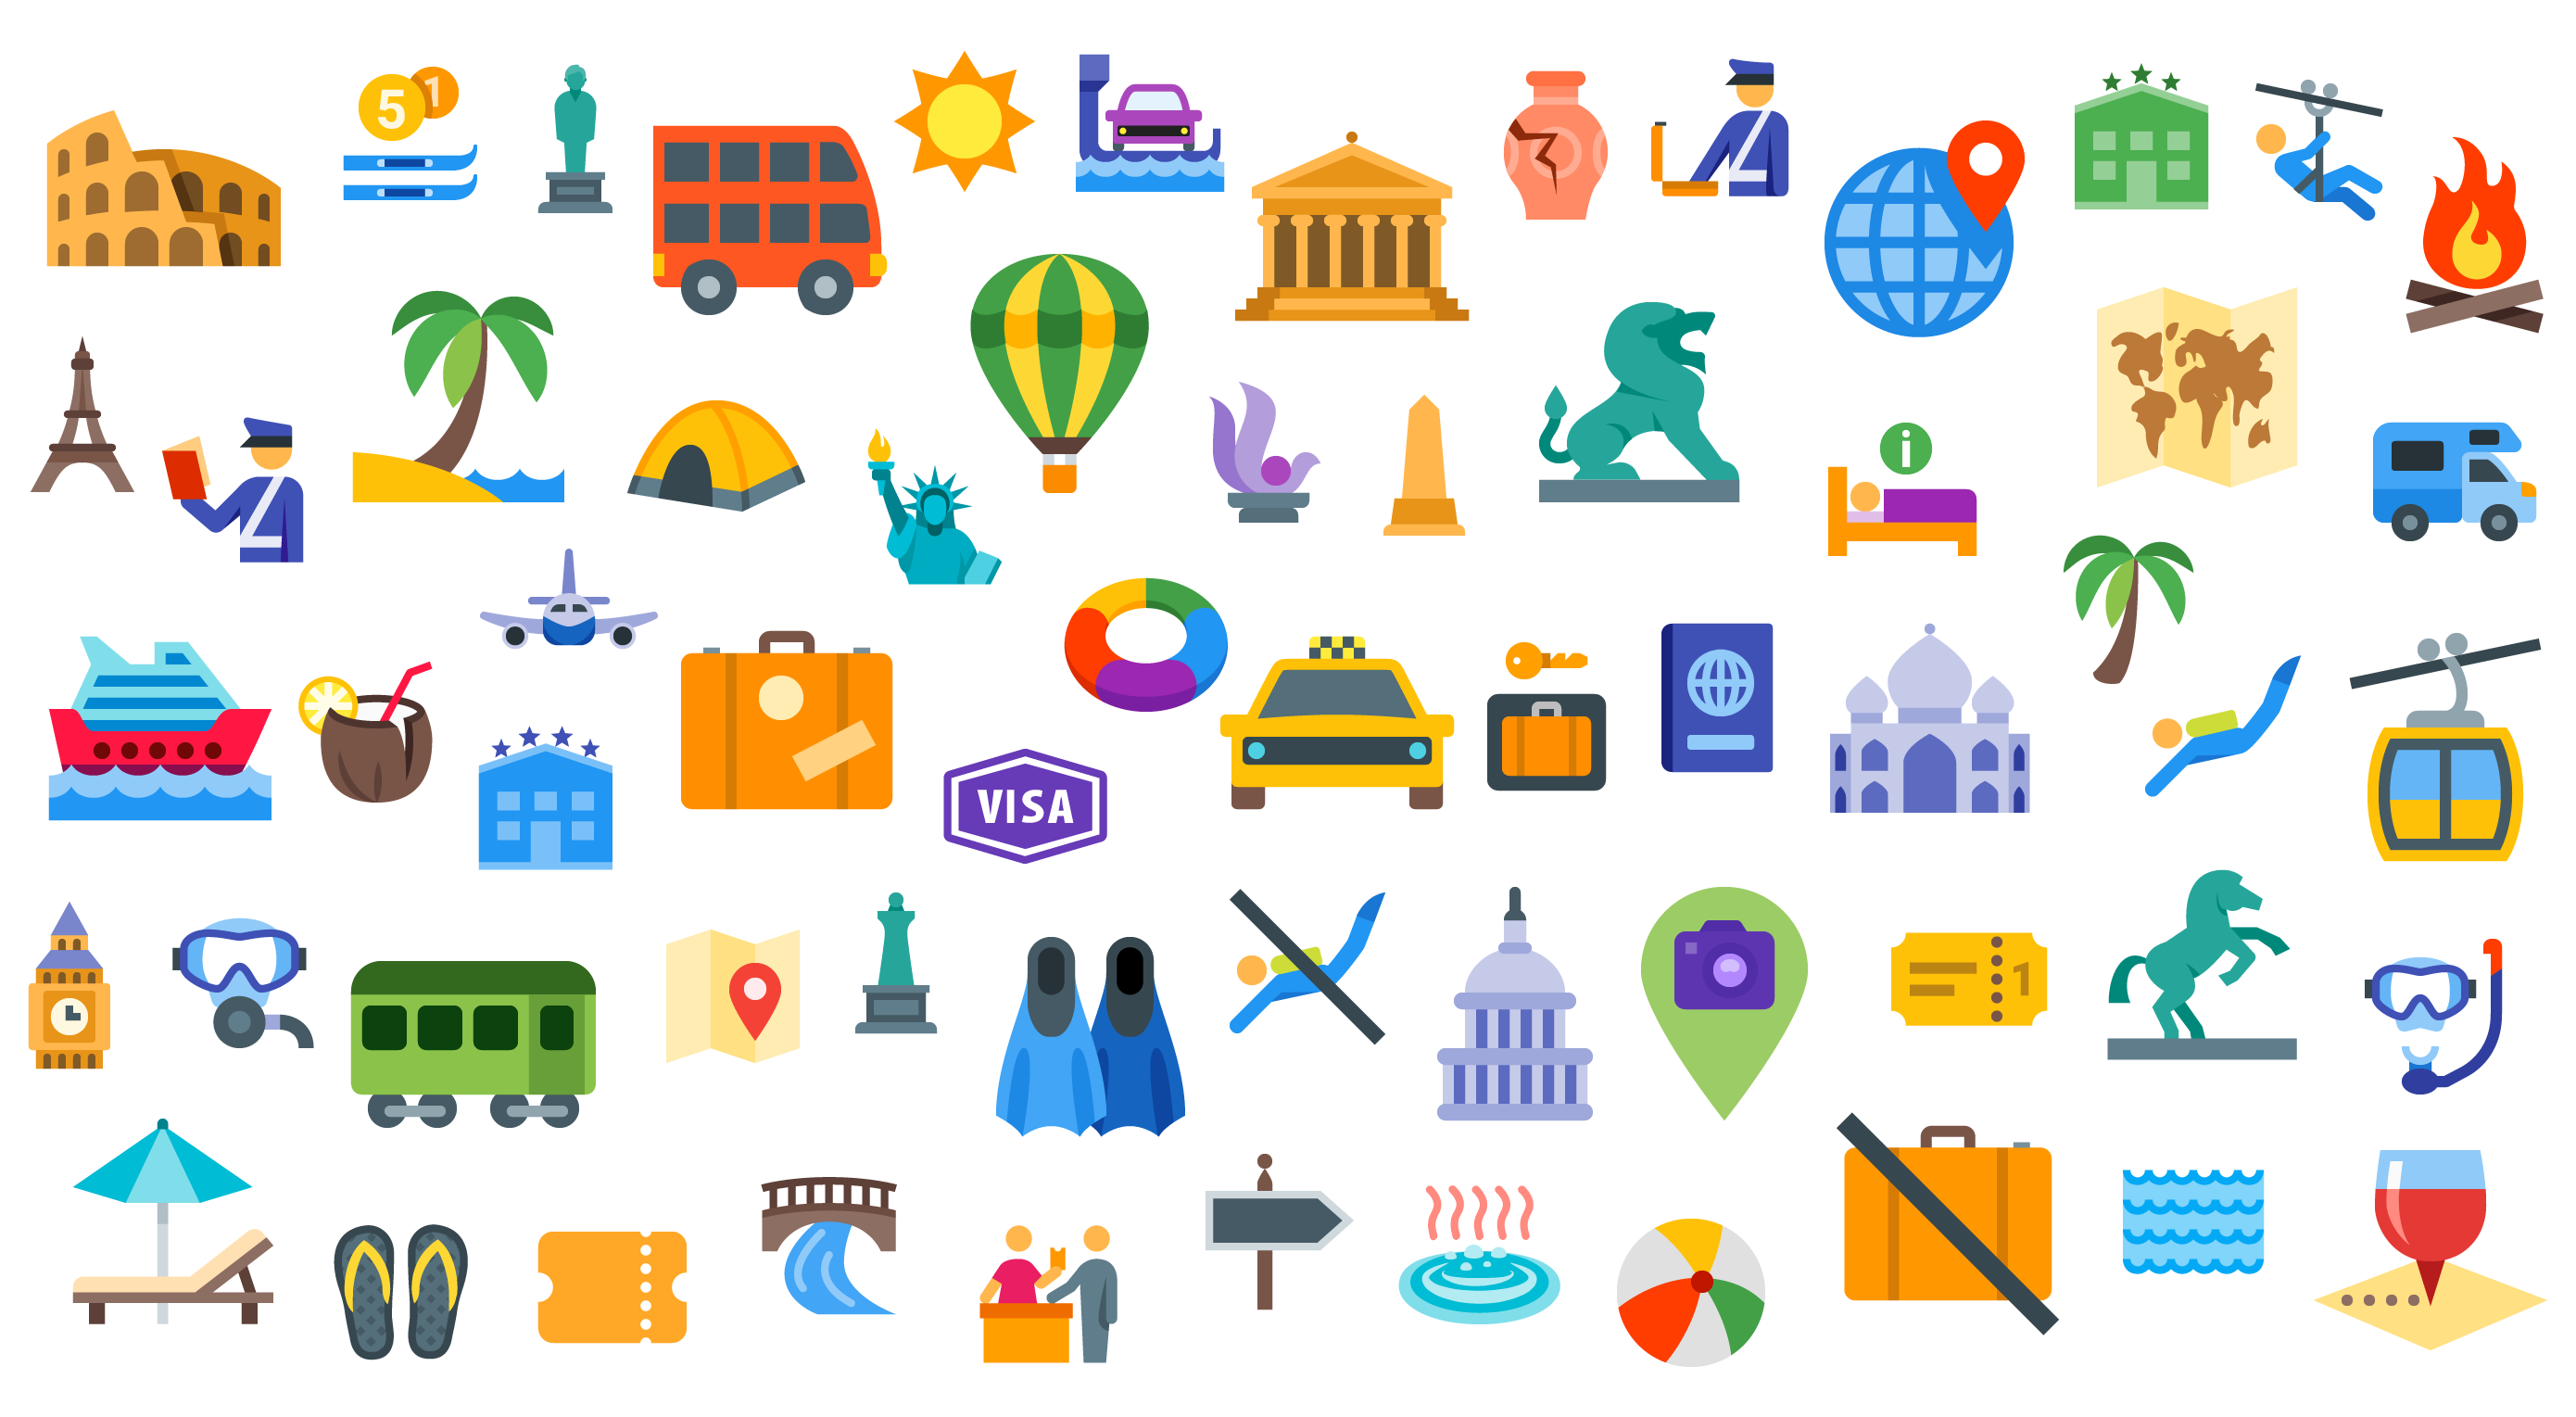 Free Download: 60+ Travel Icons by Icons8 | Webdesigner Depot ...